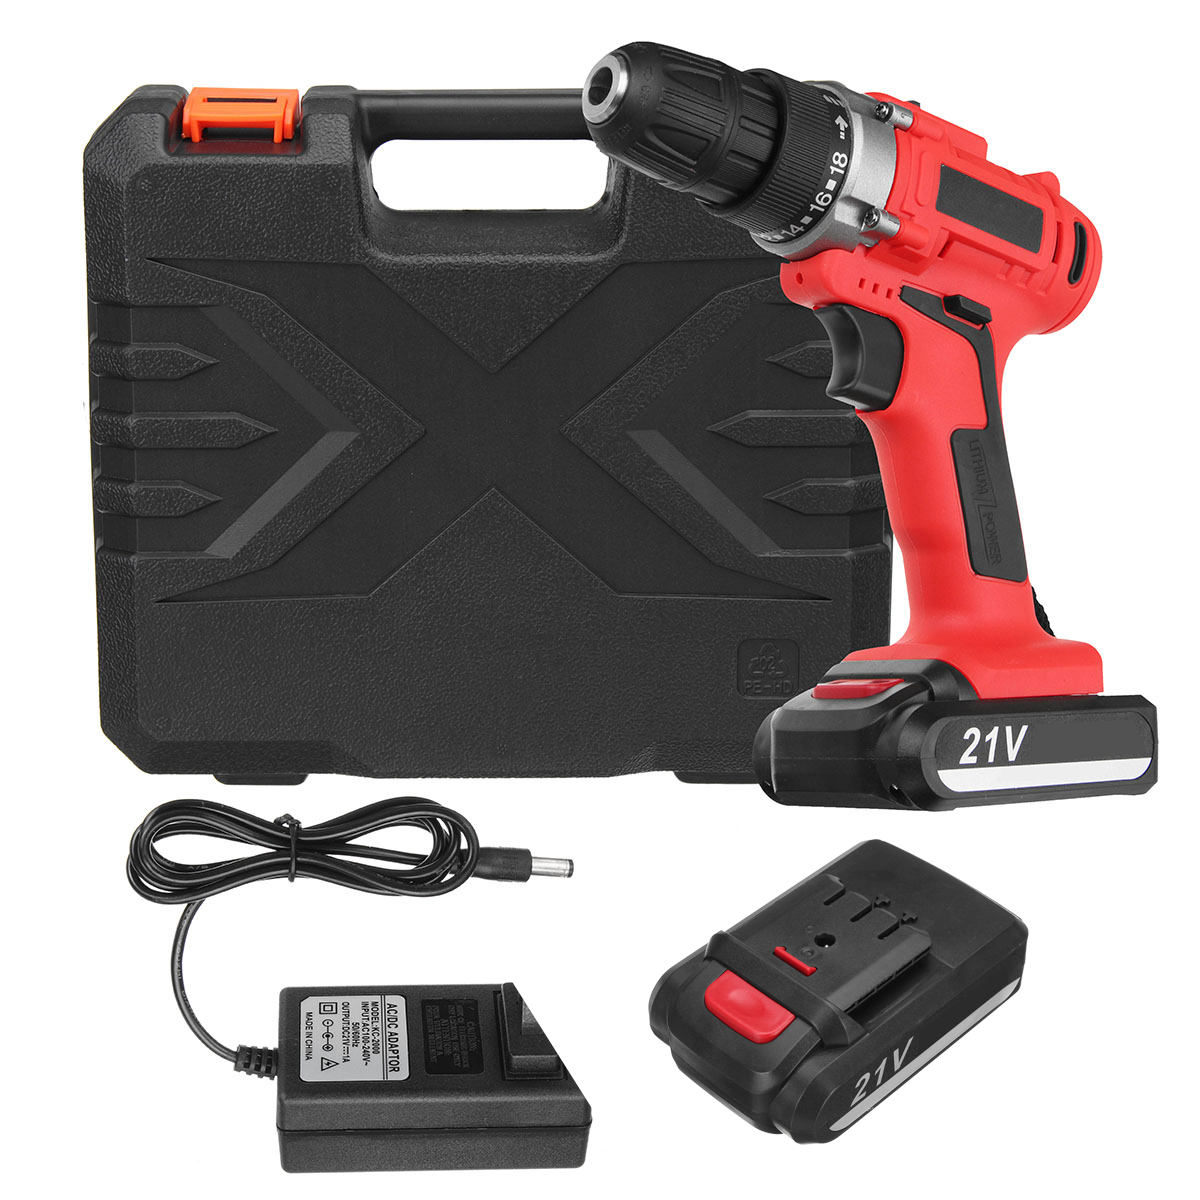 300W-21V-LED-Cordless-Electric-Drill-Screwdriver-1500mAh-Rechargeable-Li-Ion-Battery-Repair-Tools-1421882-8